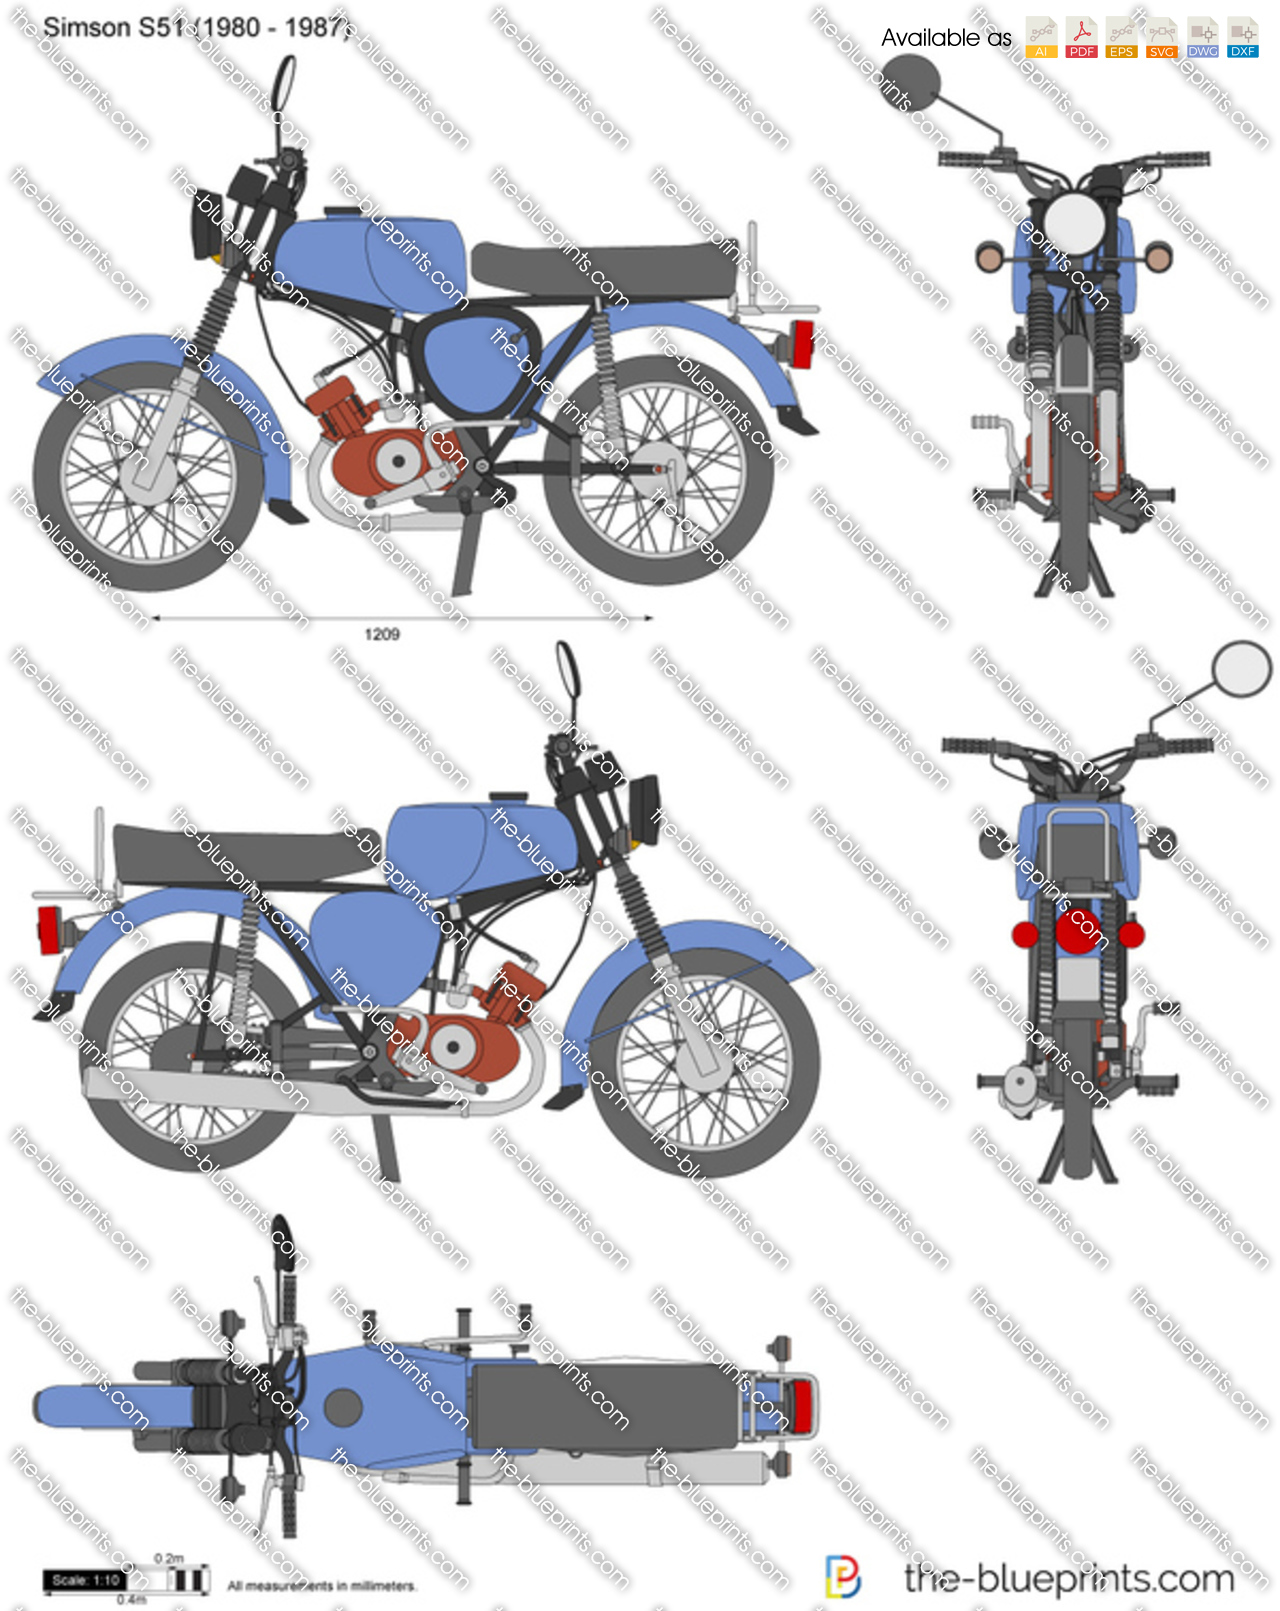 Simson S51 vector drawing